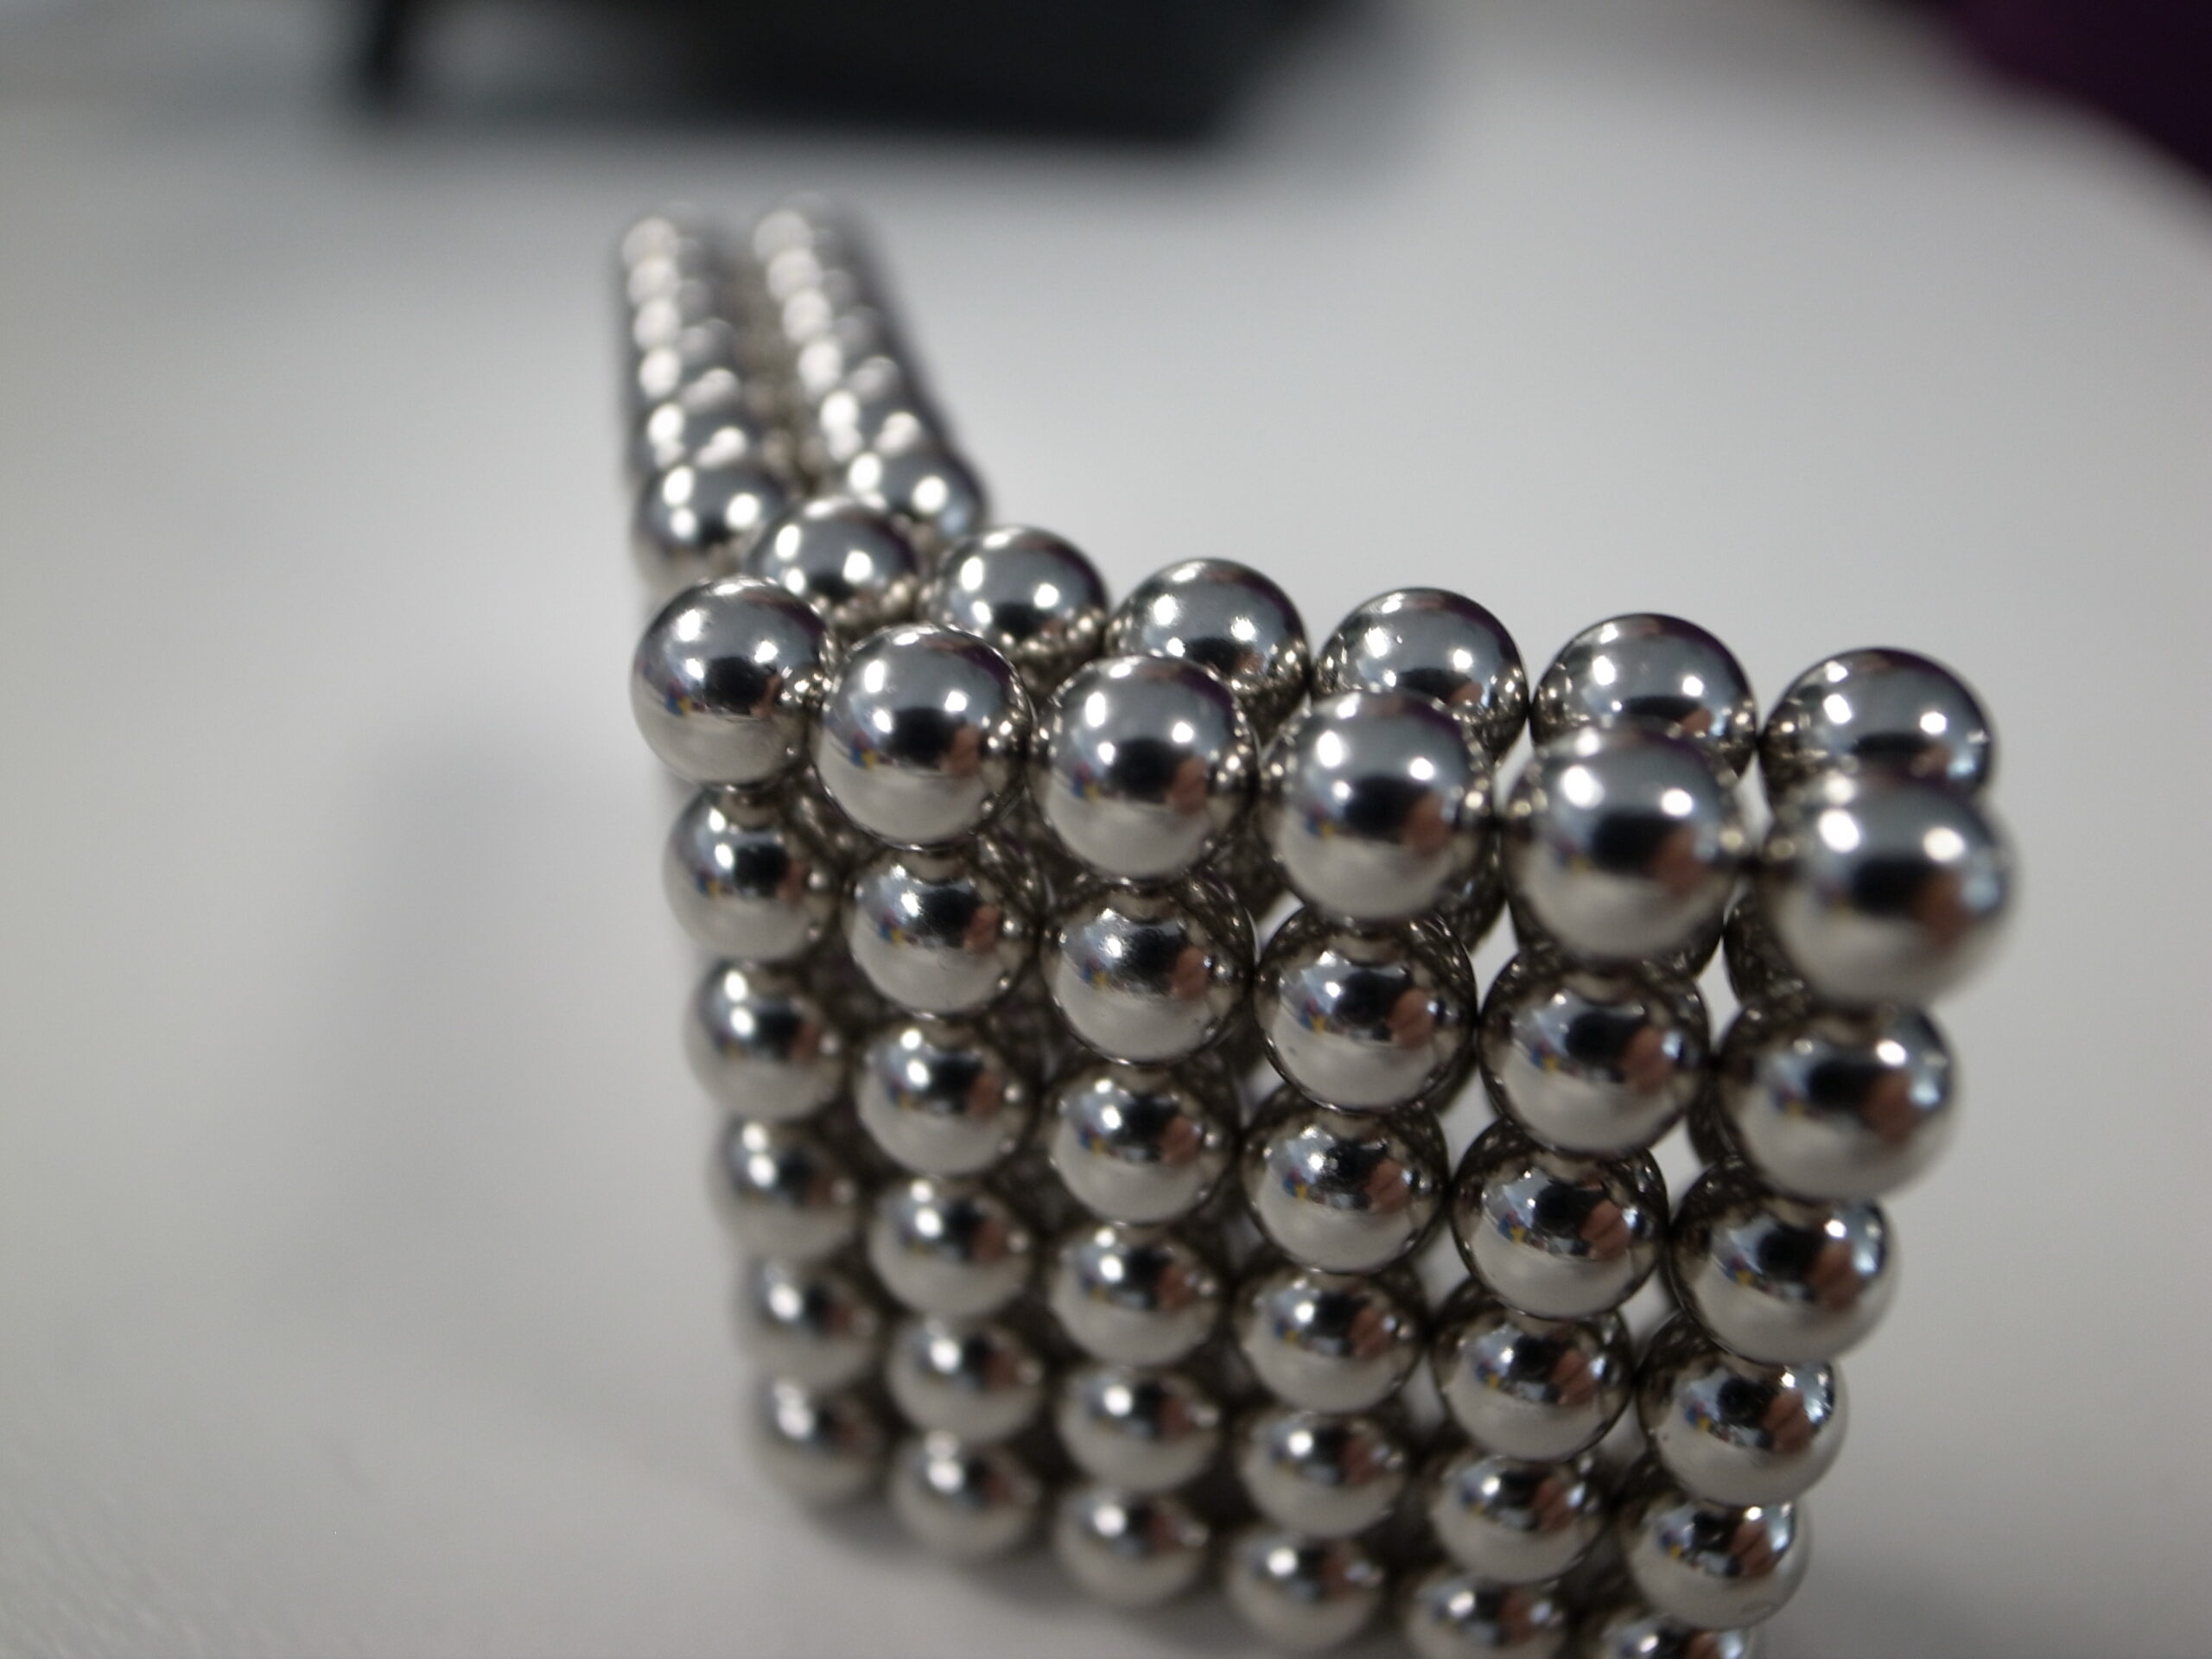 Those little magnetic balls are back on the market after a two